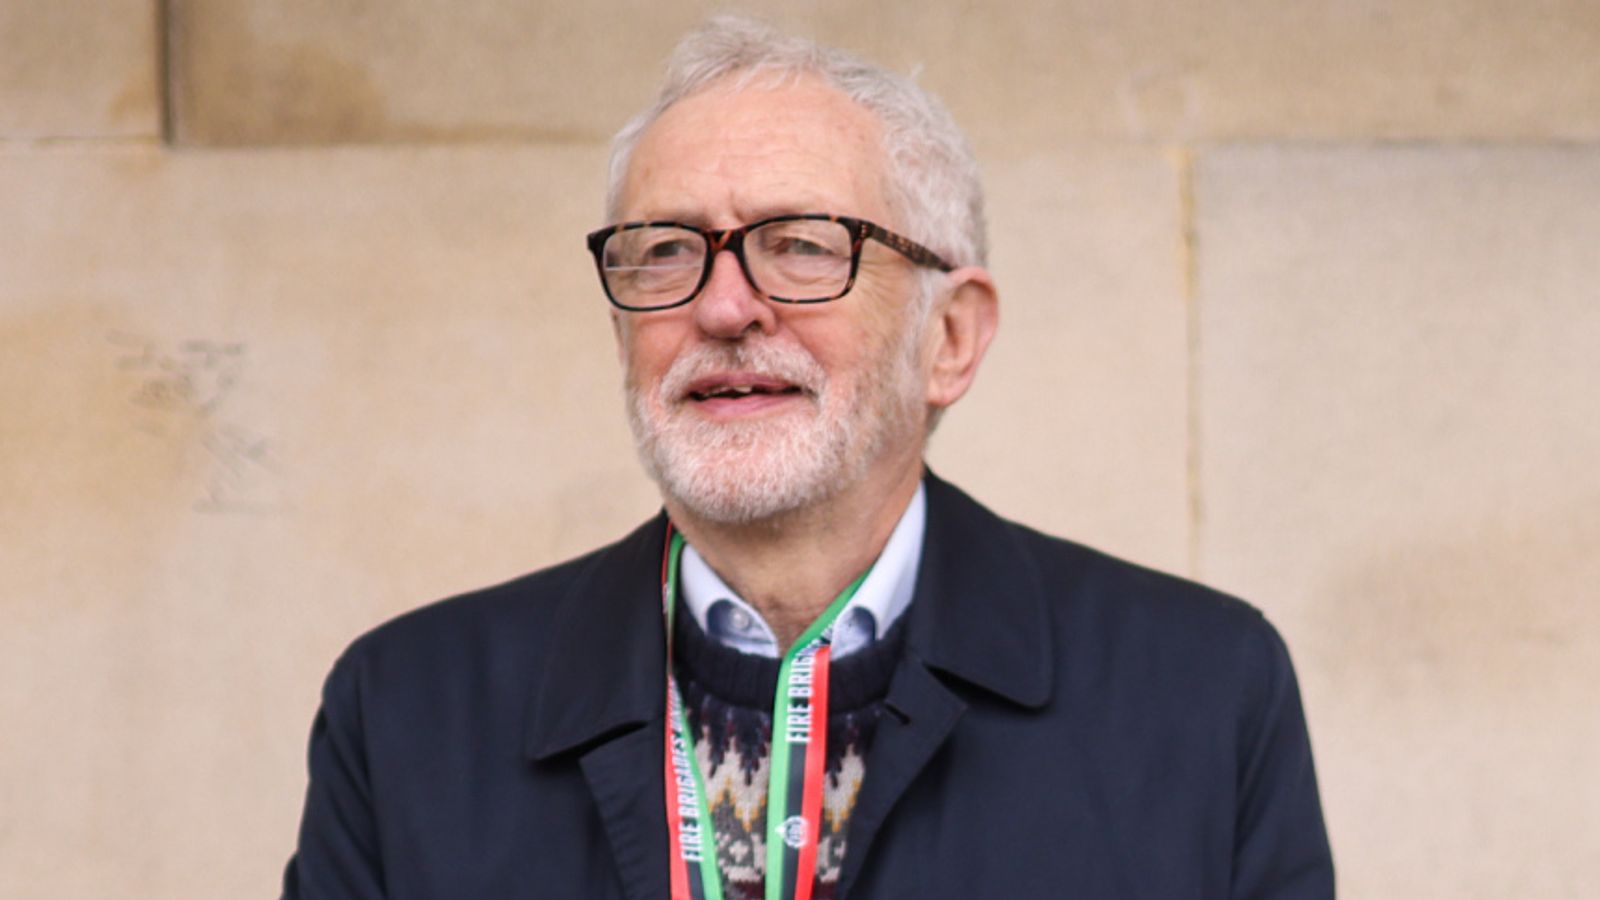 Jeremy Corbyn accuses Labour of 'shameful attack' after he is blocked from standing for party